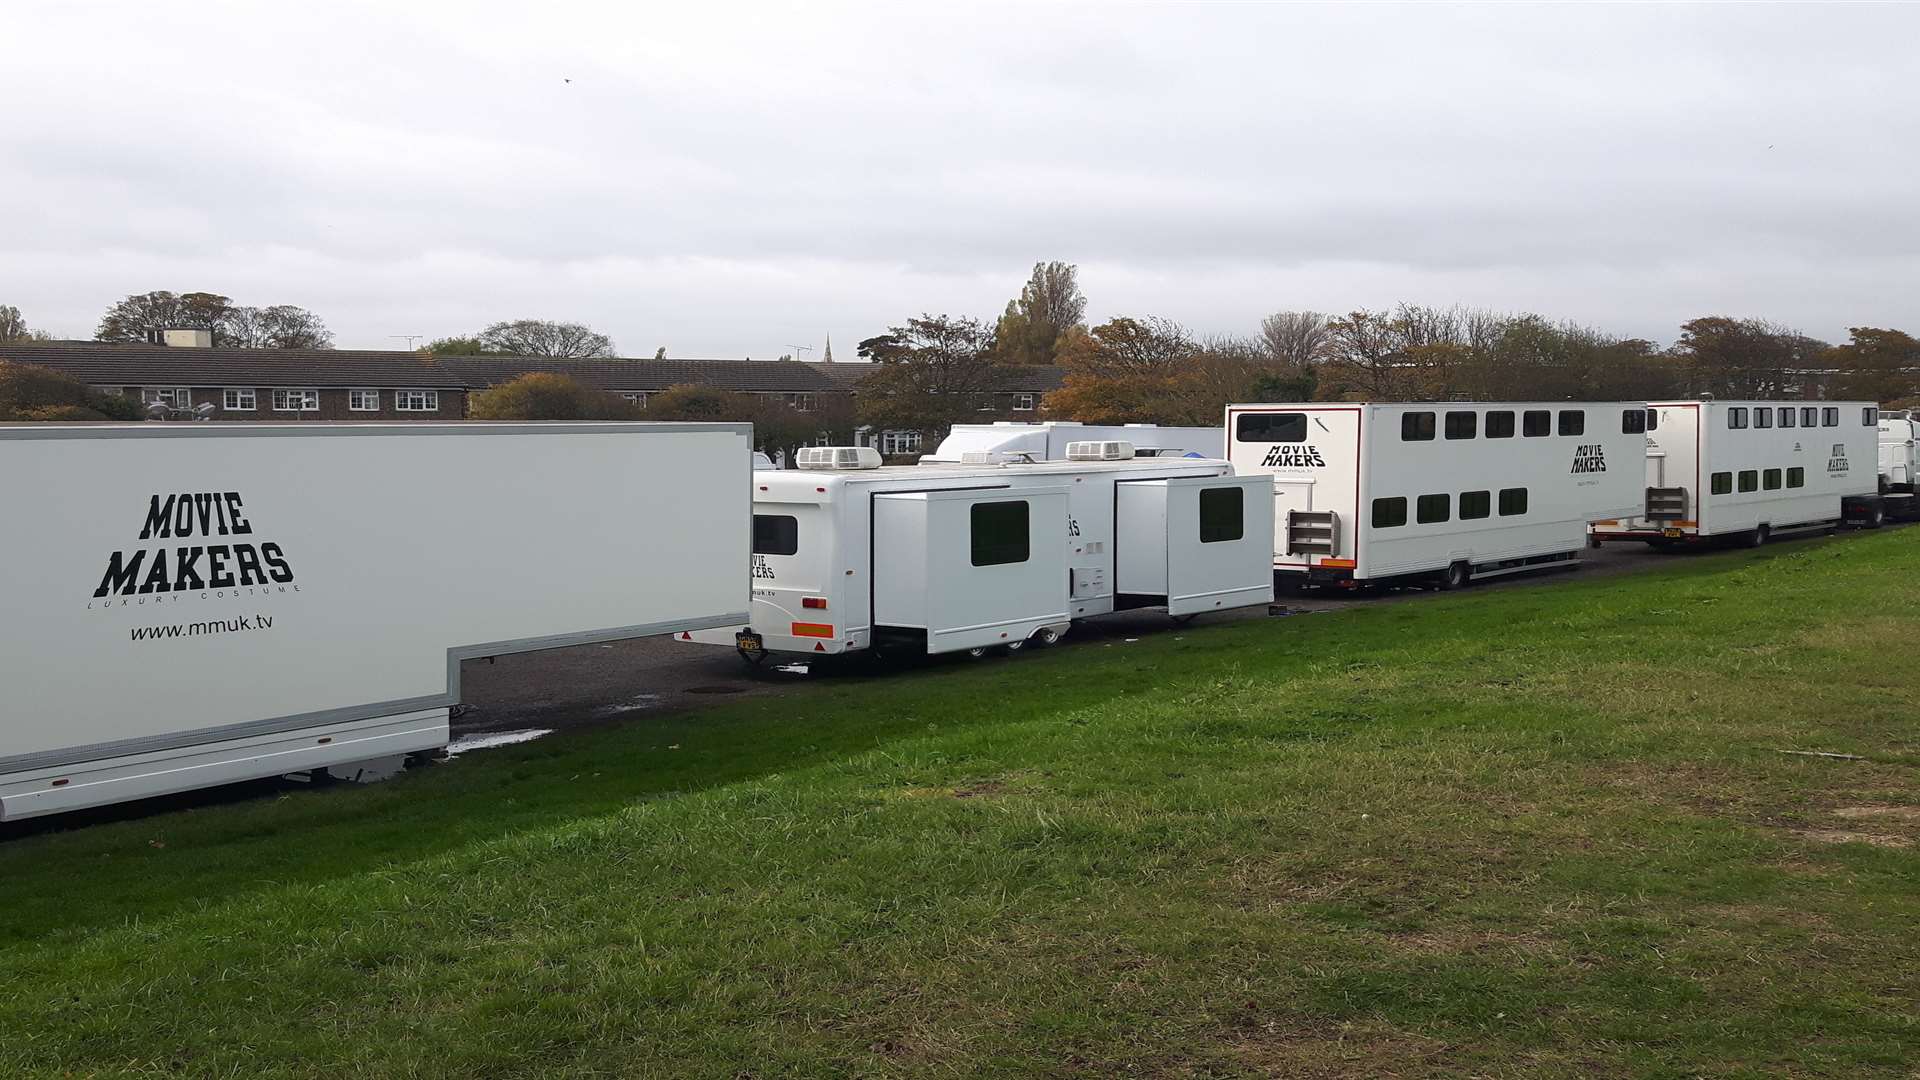 Their unit base is at Walmer Castle gravel car park, where costumes, make up and a canteen are stationed.